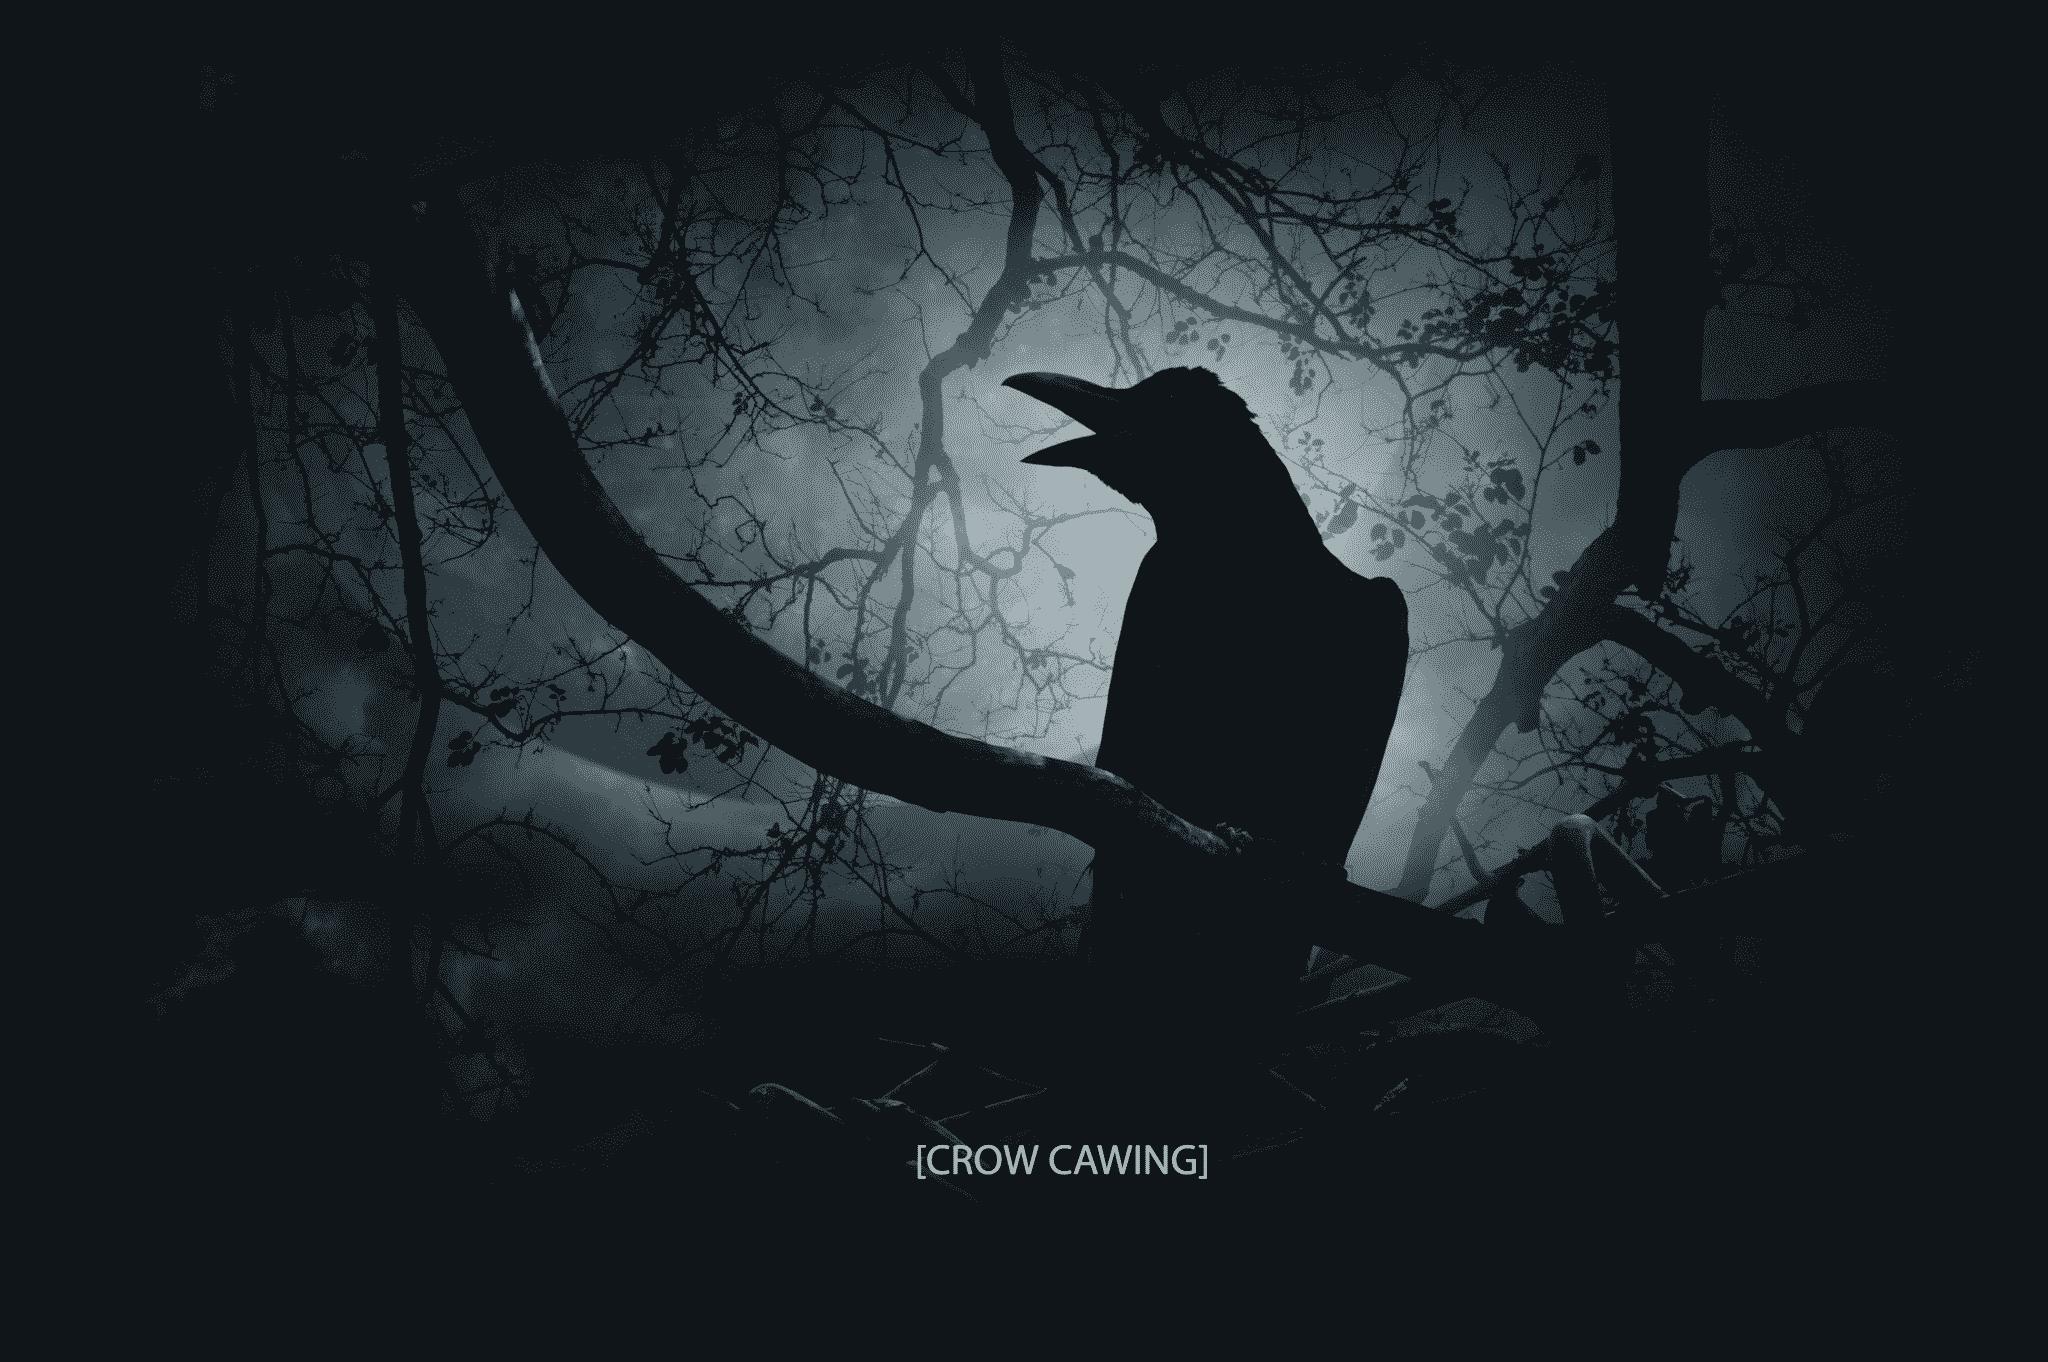 crow on a tree with bare branches backlit by the moon in a cloudy night sky